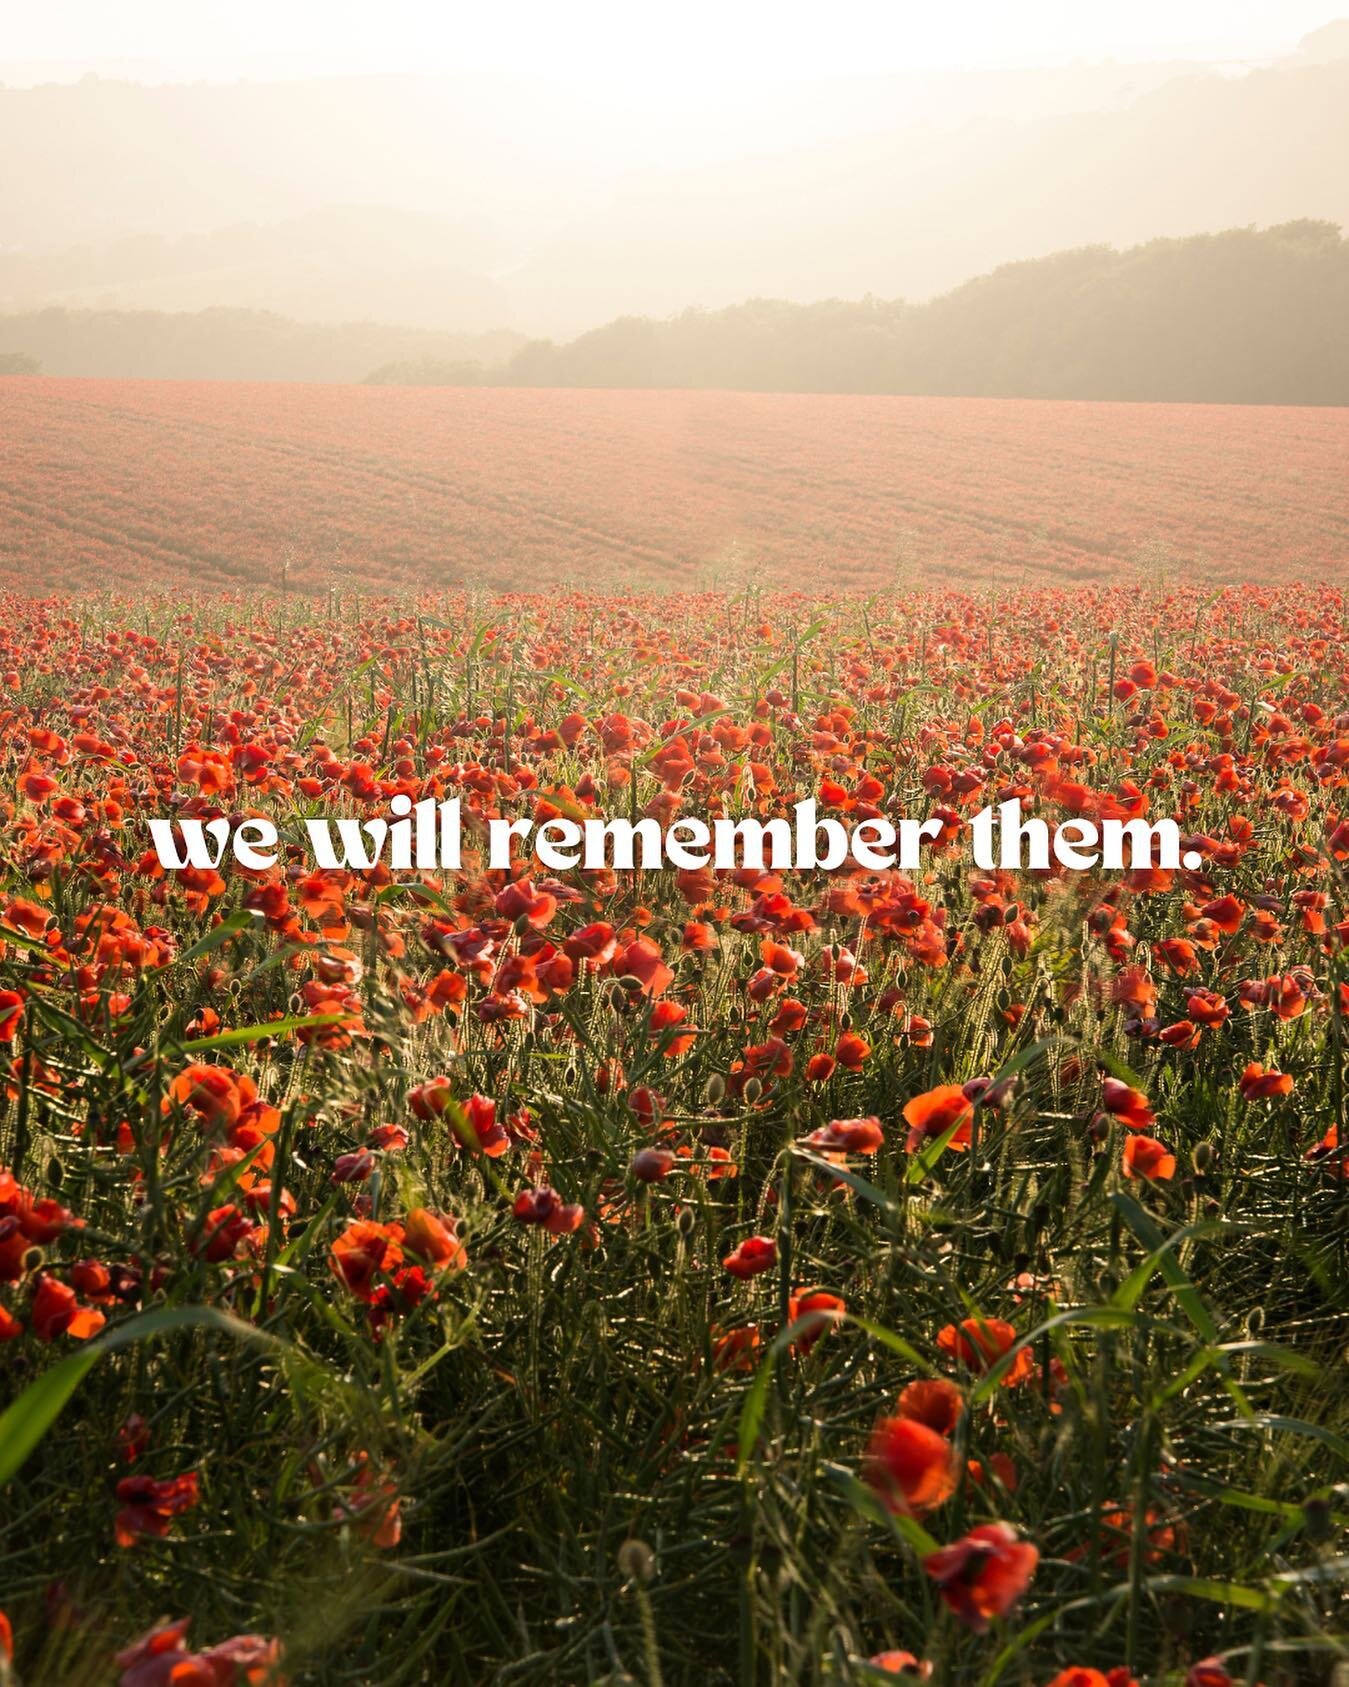 Today we remember all those who have lost their lives through conflict and war. We pray for peace and harmony amongst all nations.

#remembrancesunday